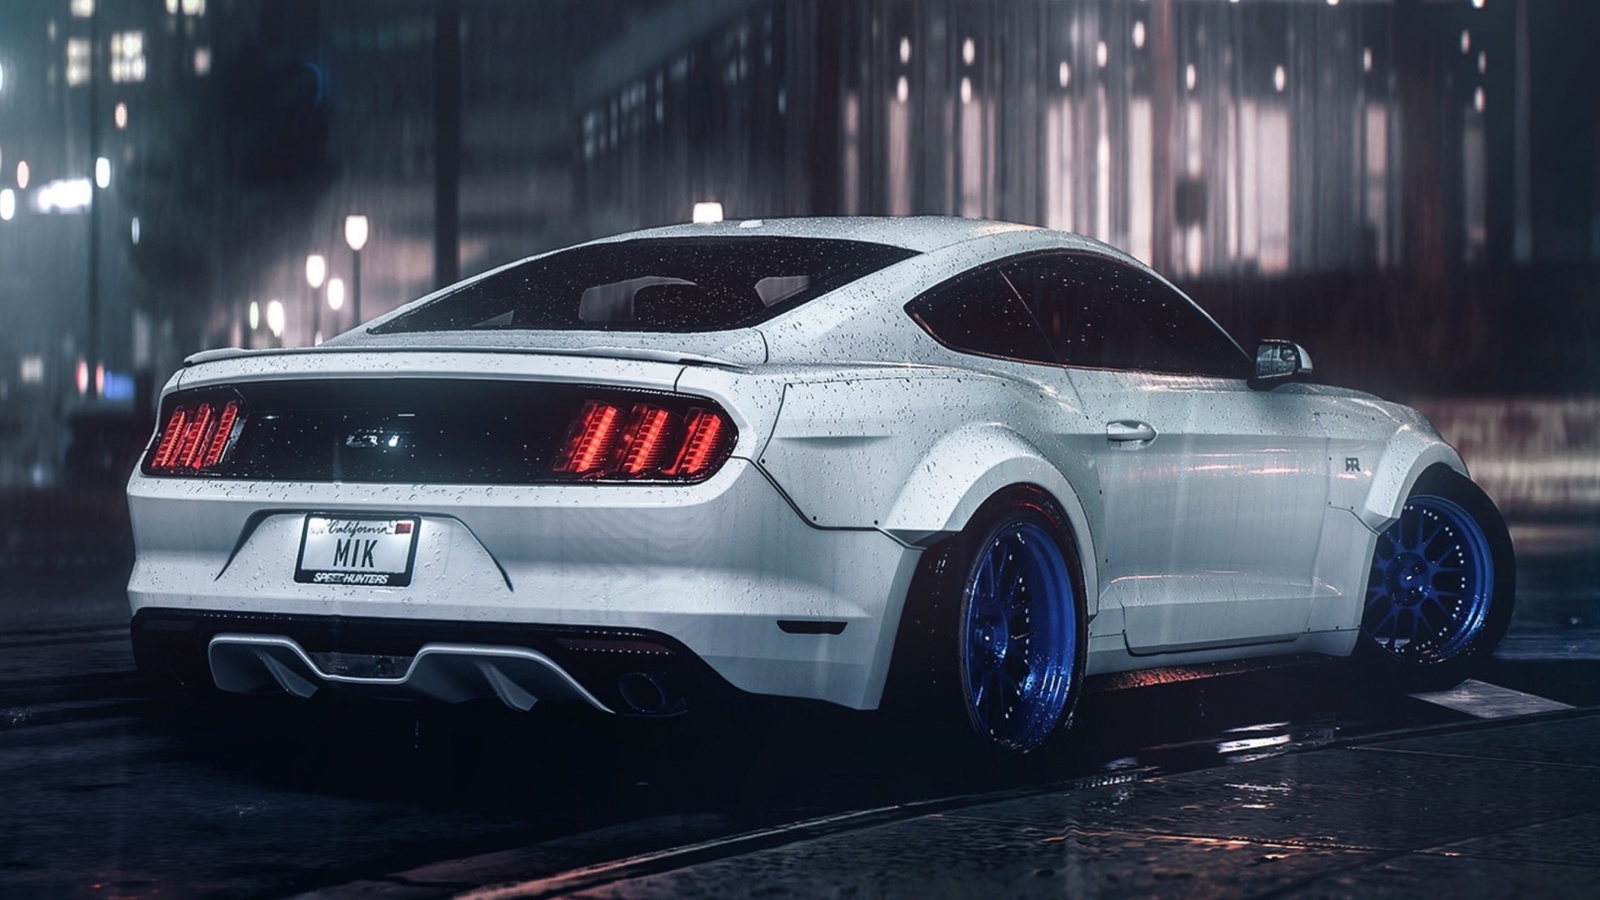 Das Ford Mustang Shelby GT350 Wallpaper 1600x900